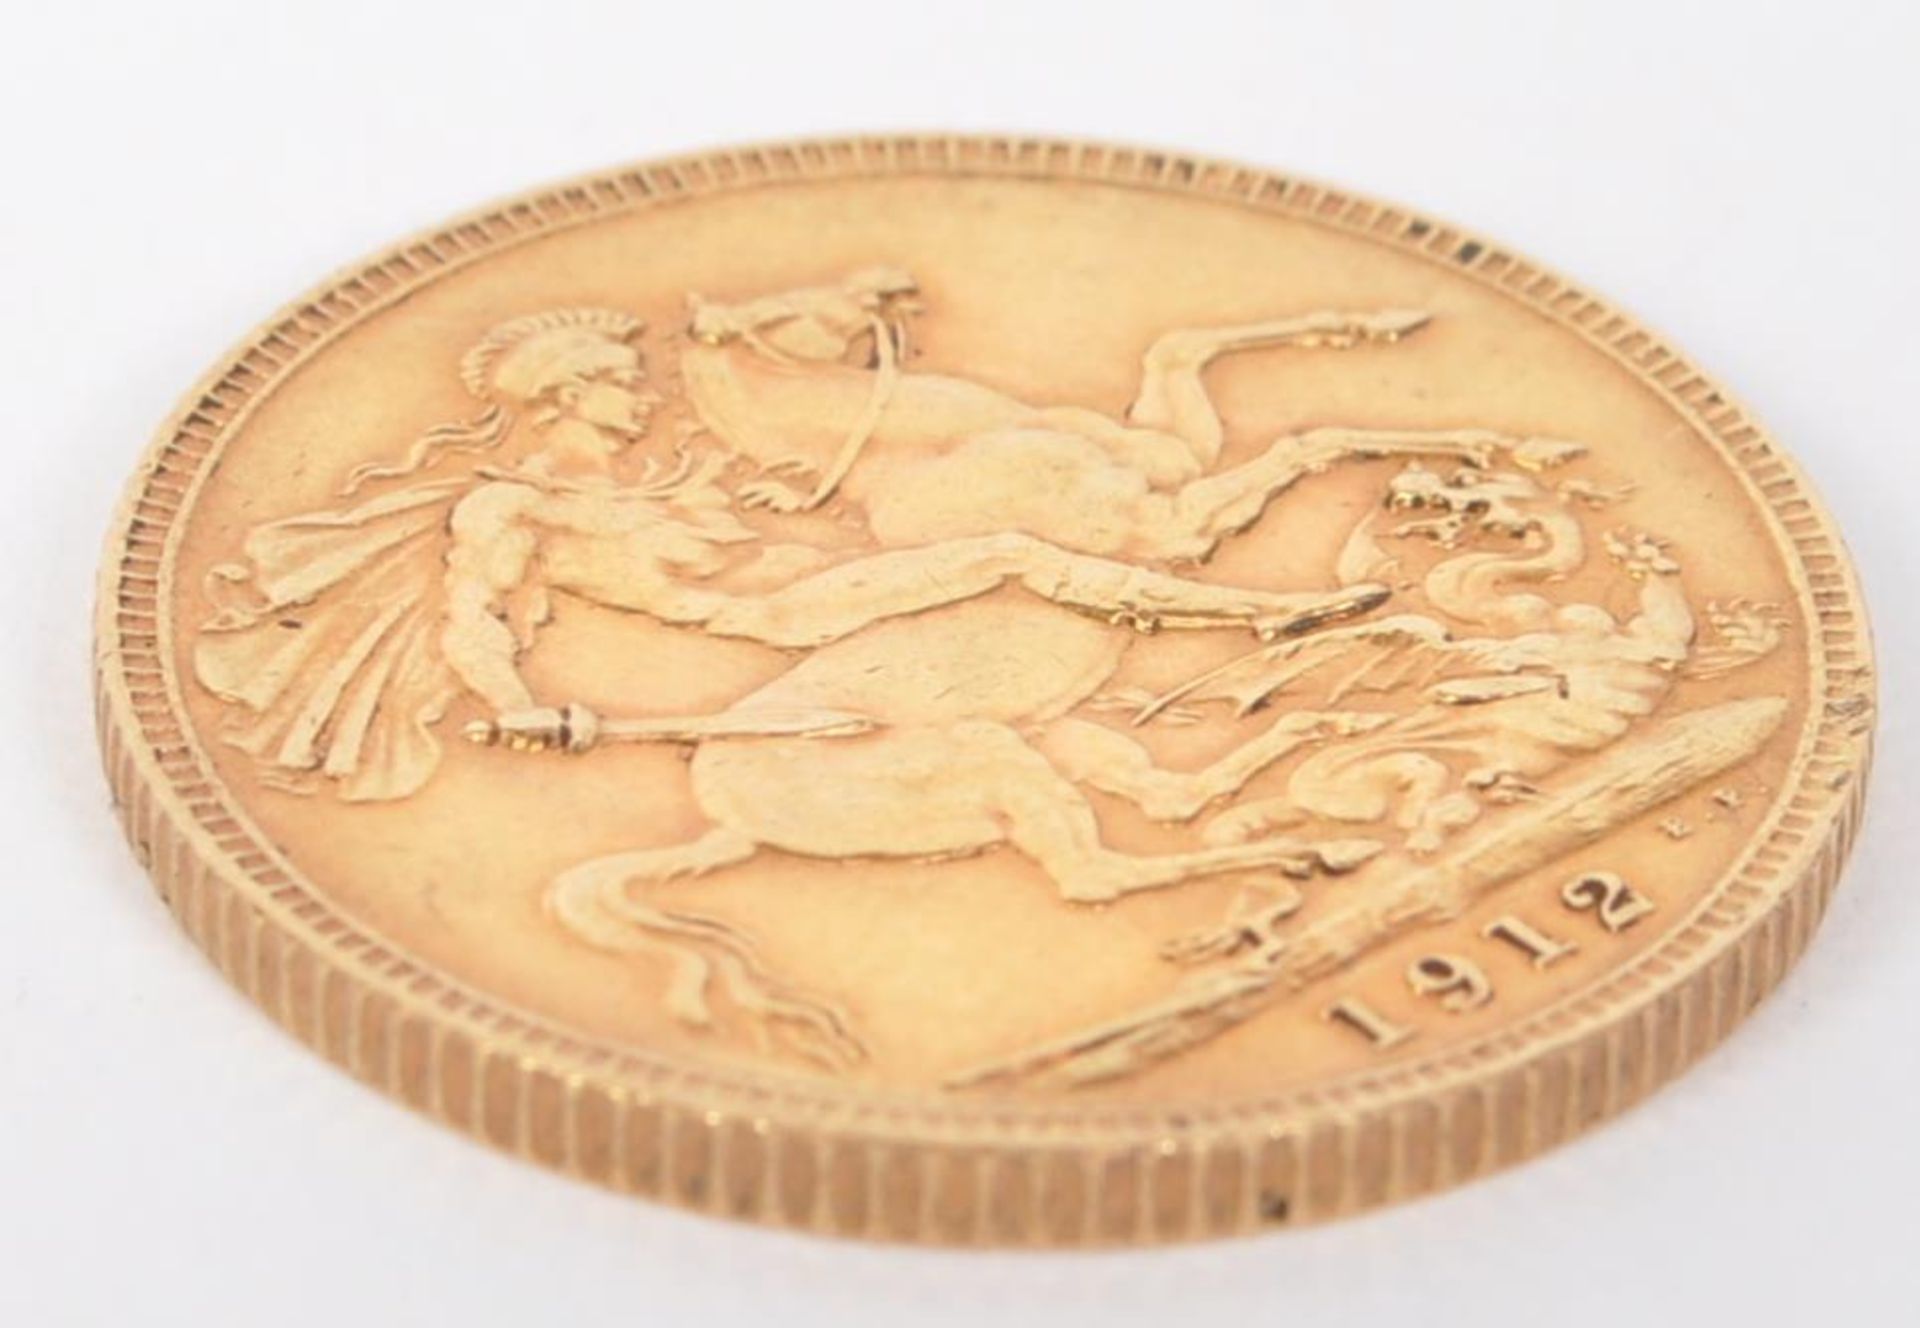 22CT GOLD 1912 GEORGE V FULL SOVEREIGN COIN - Image 4 of 4